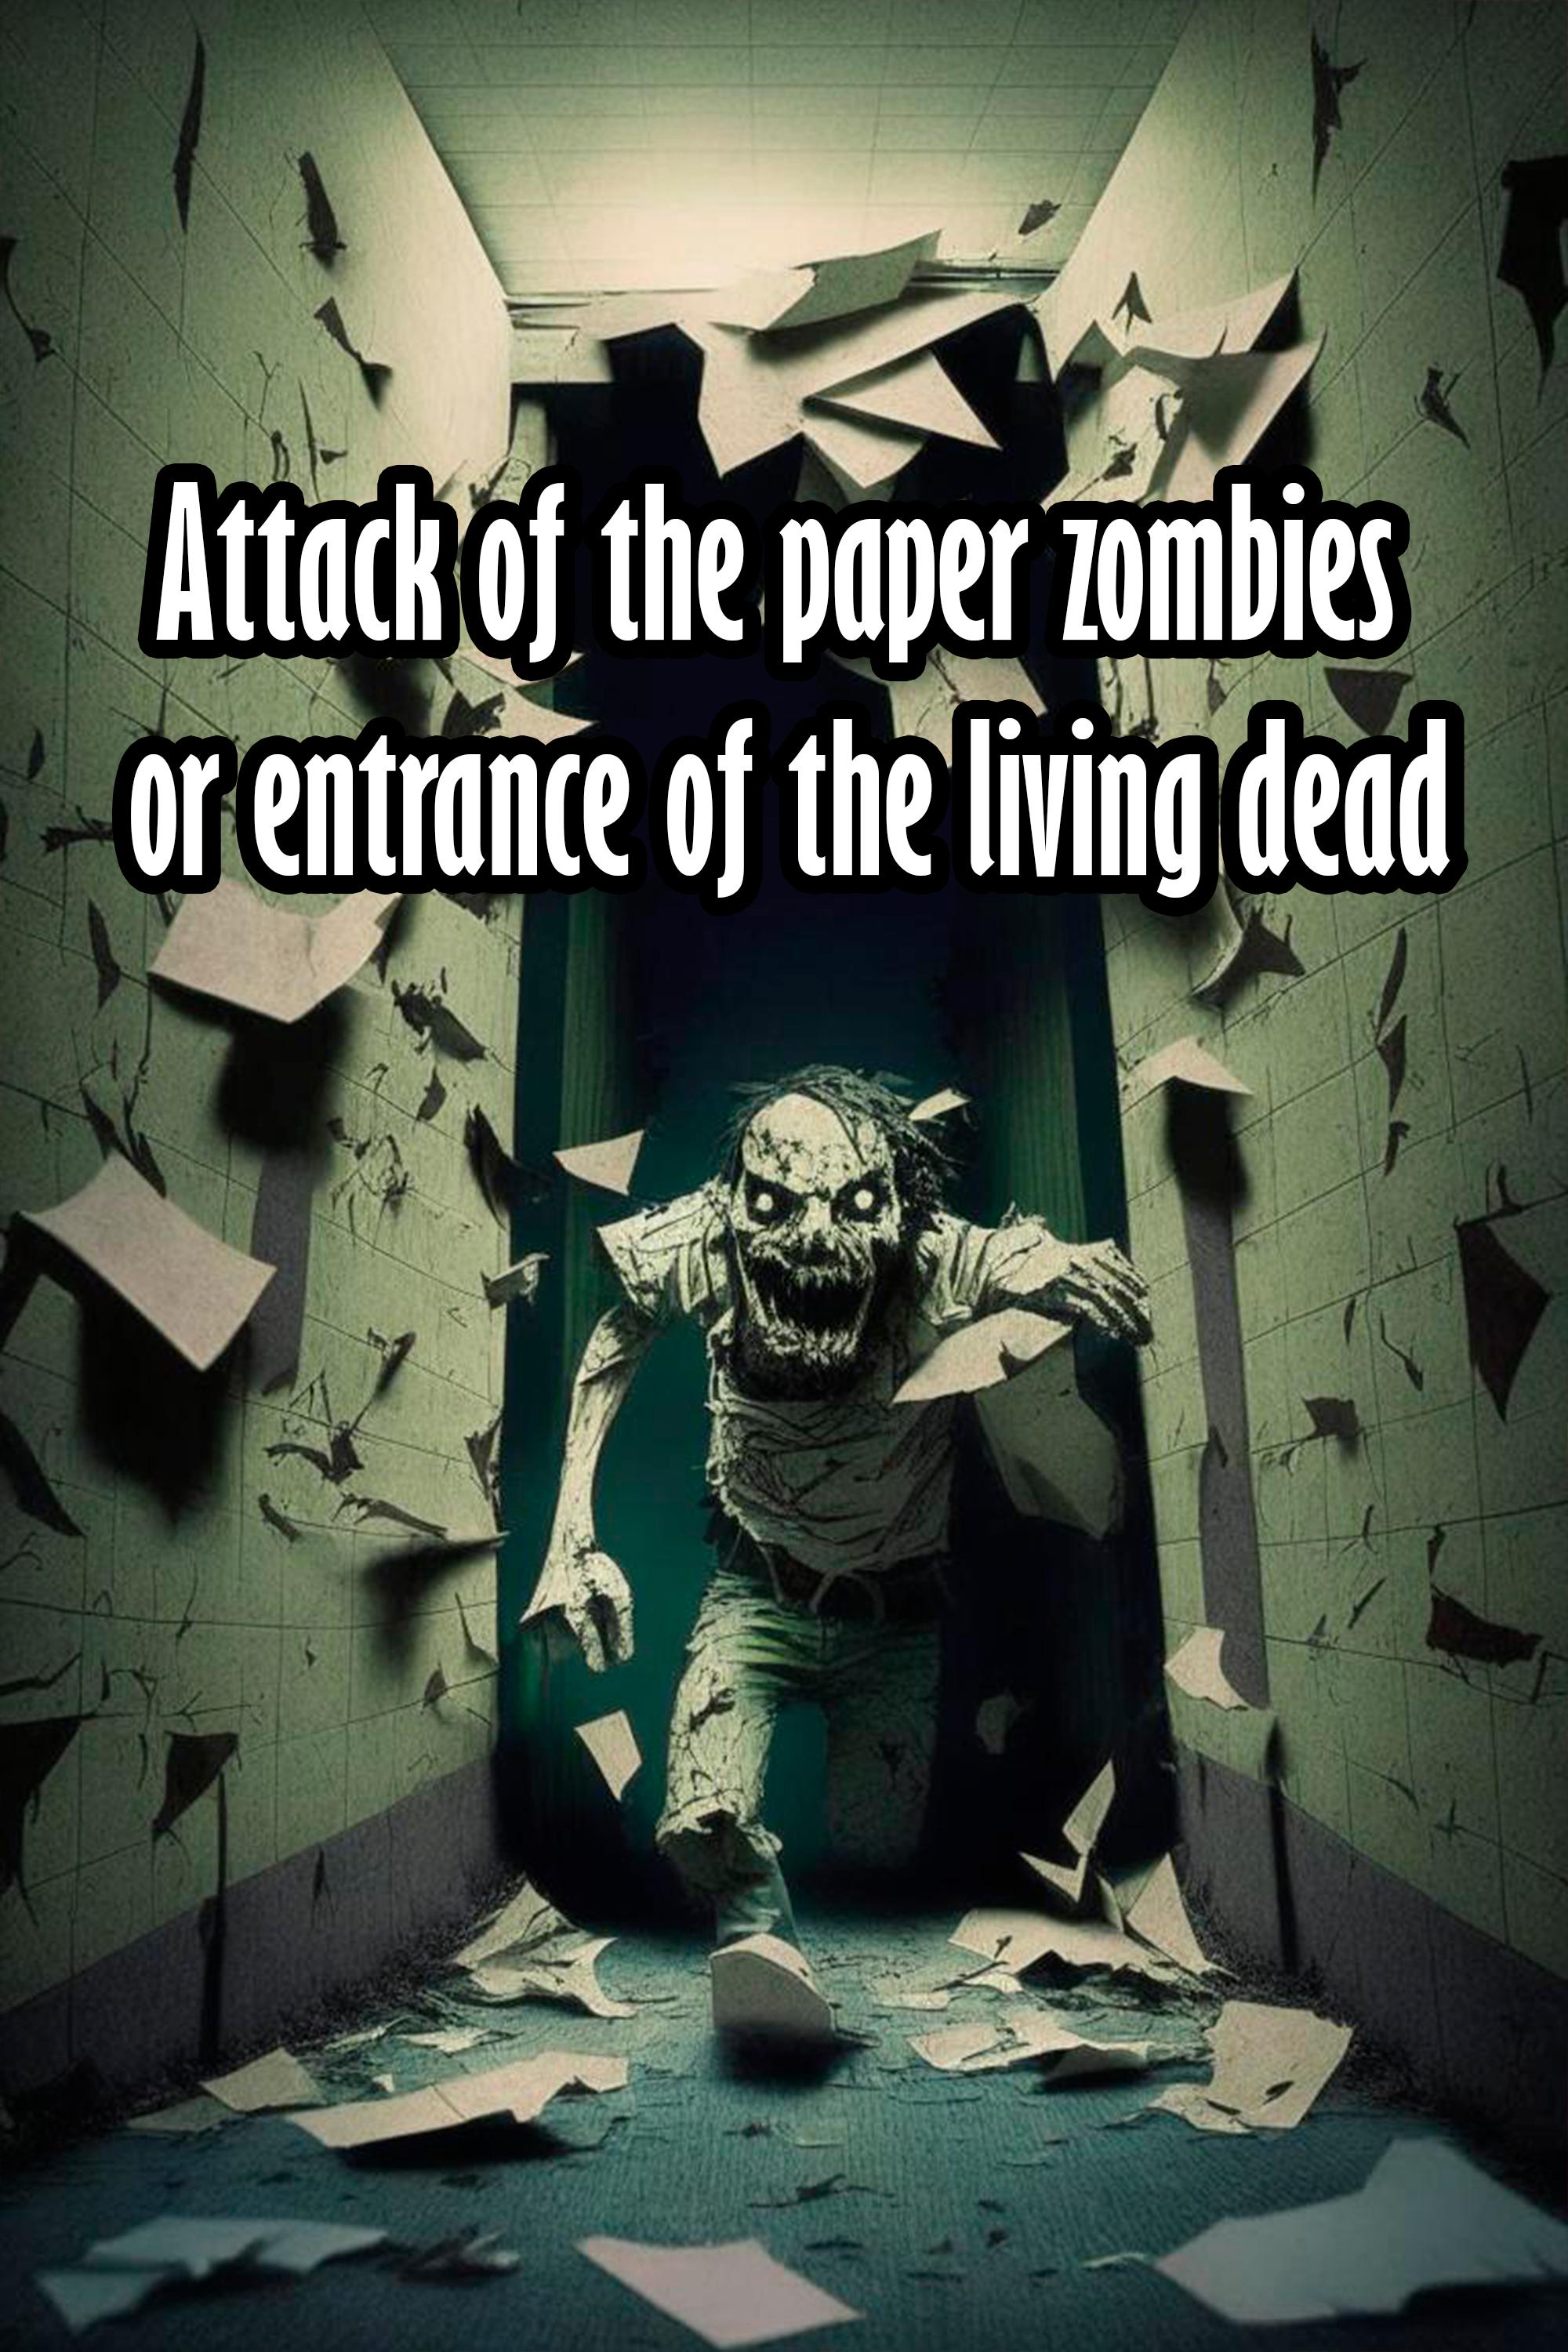 Attack of the paper zombies or entrance of the living dead